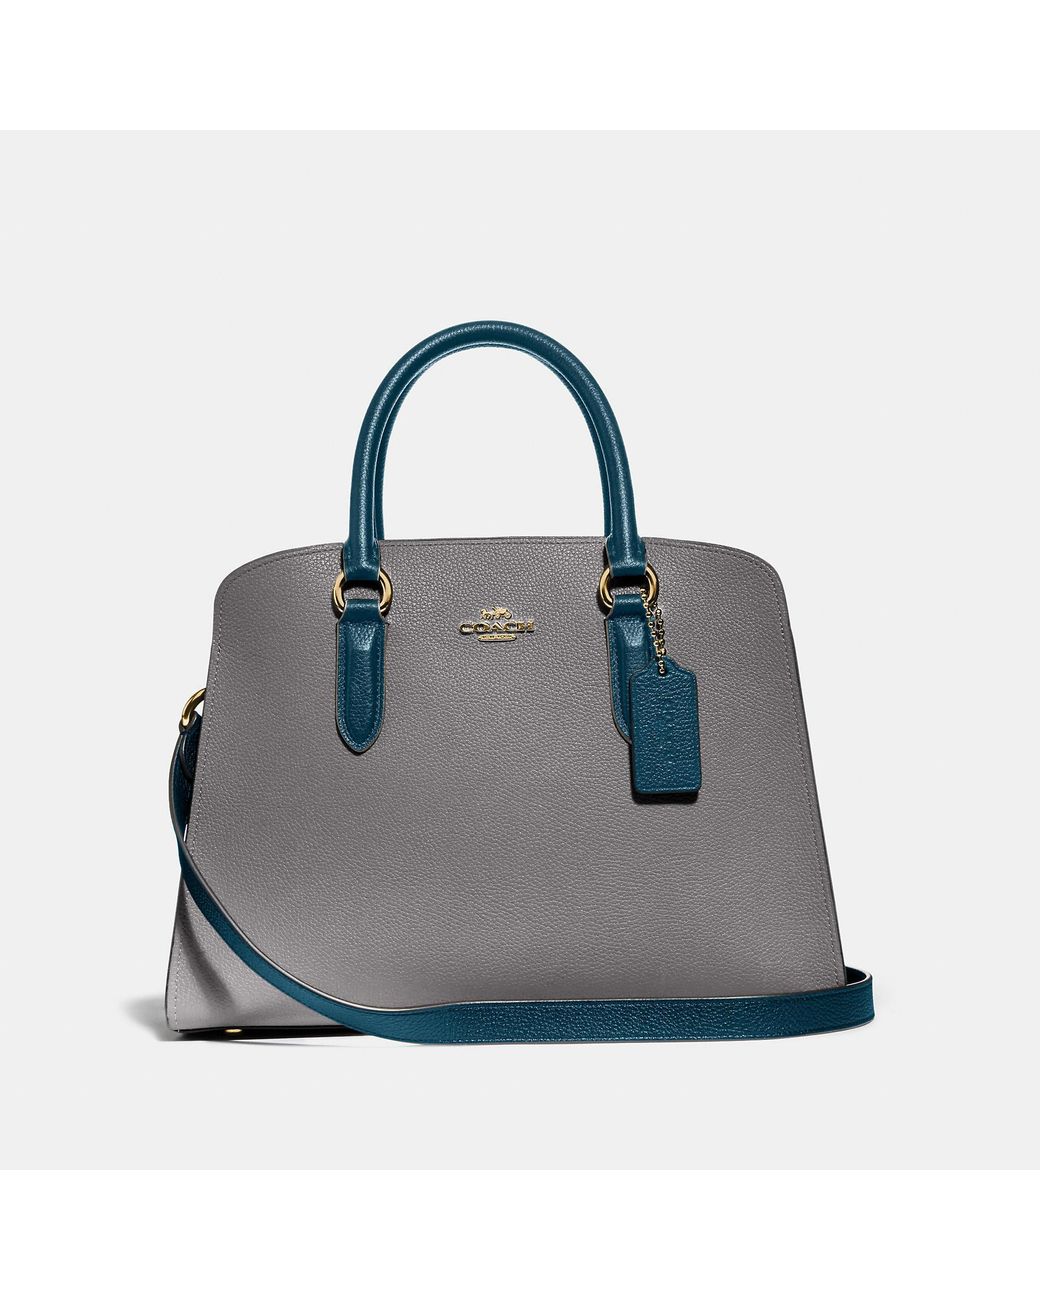 COACH Channing Carryall In Colorblock in Gray | Lyst